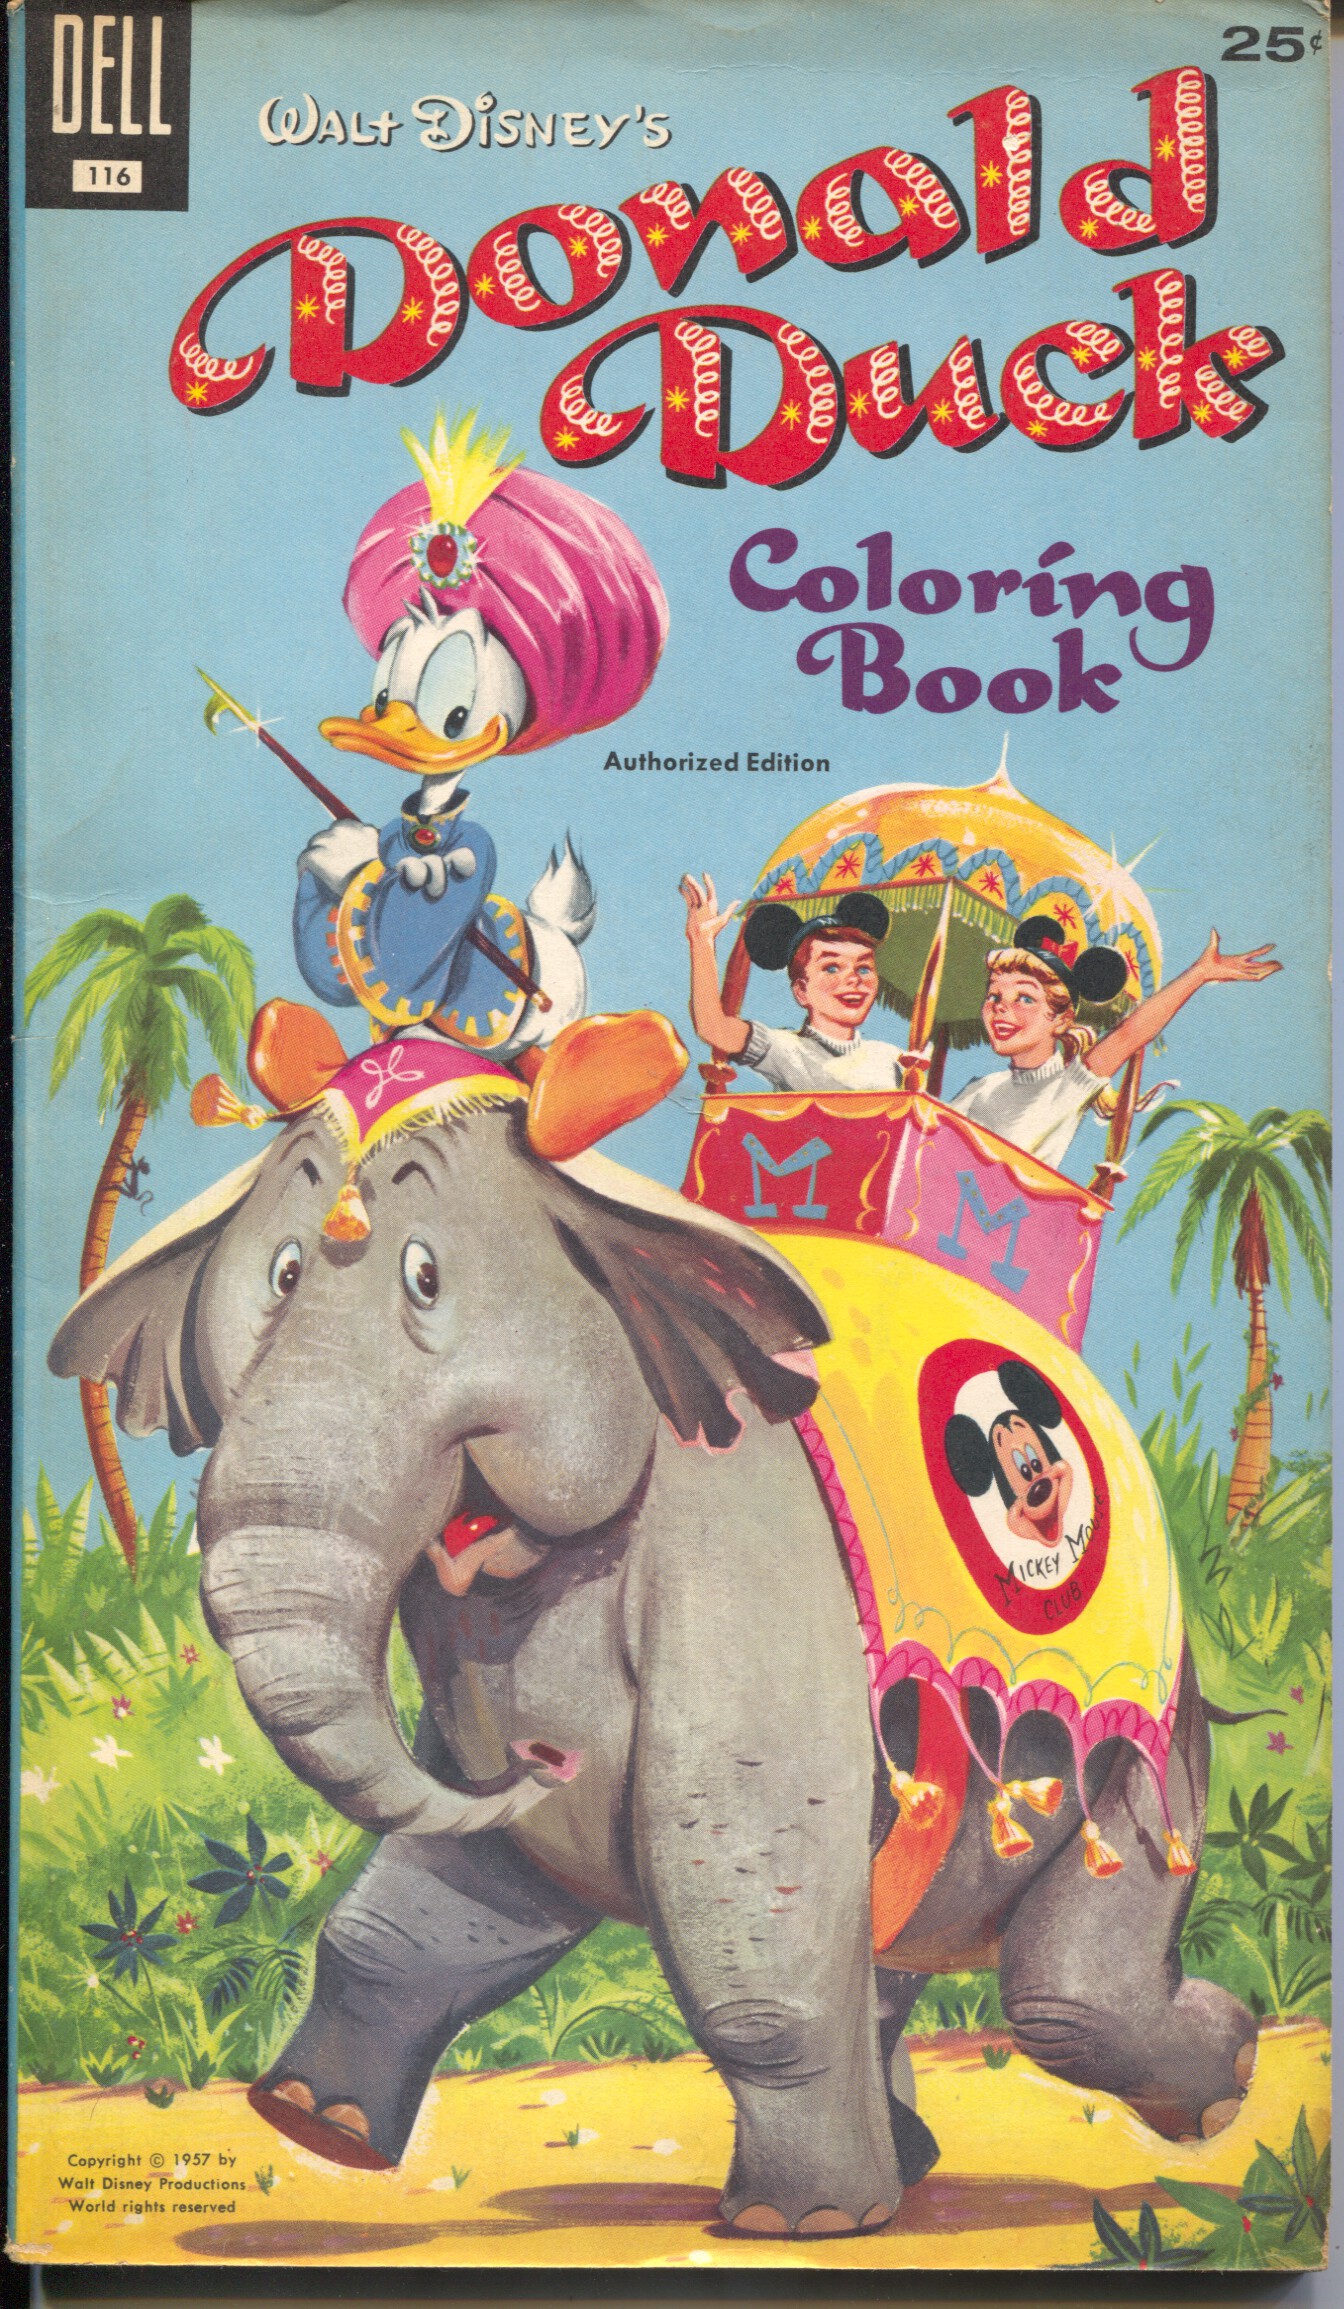 Coloring　1957-Dell-Mickey　Book　DTA　#116　Collectibles　Walt　Disney　Mouse　Comic　Club-VG/FN:　(1957)　Donald　Duck